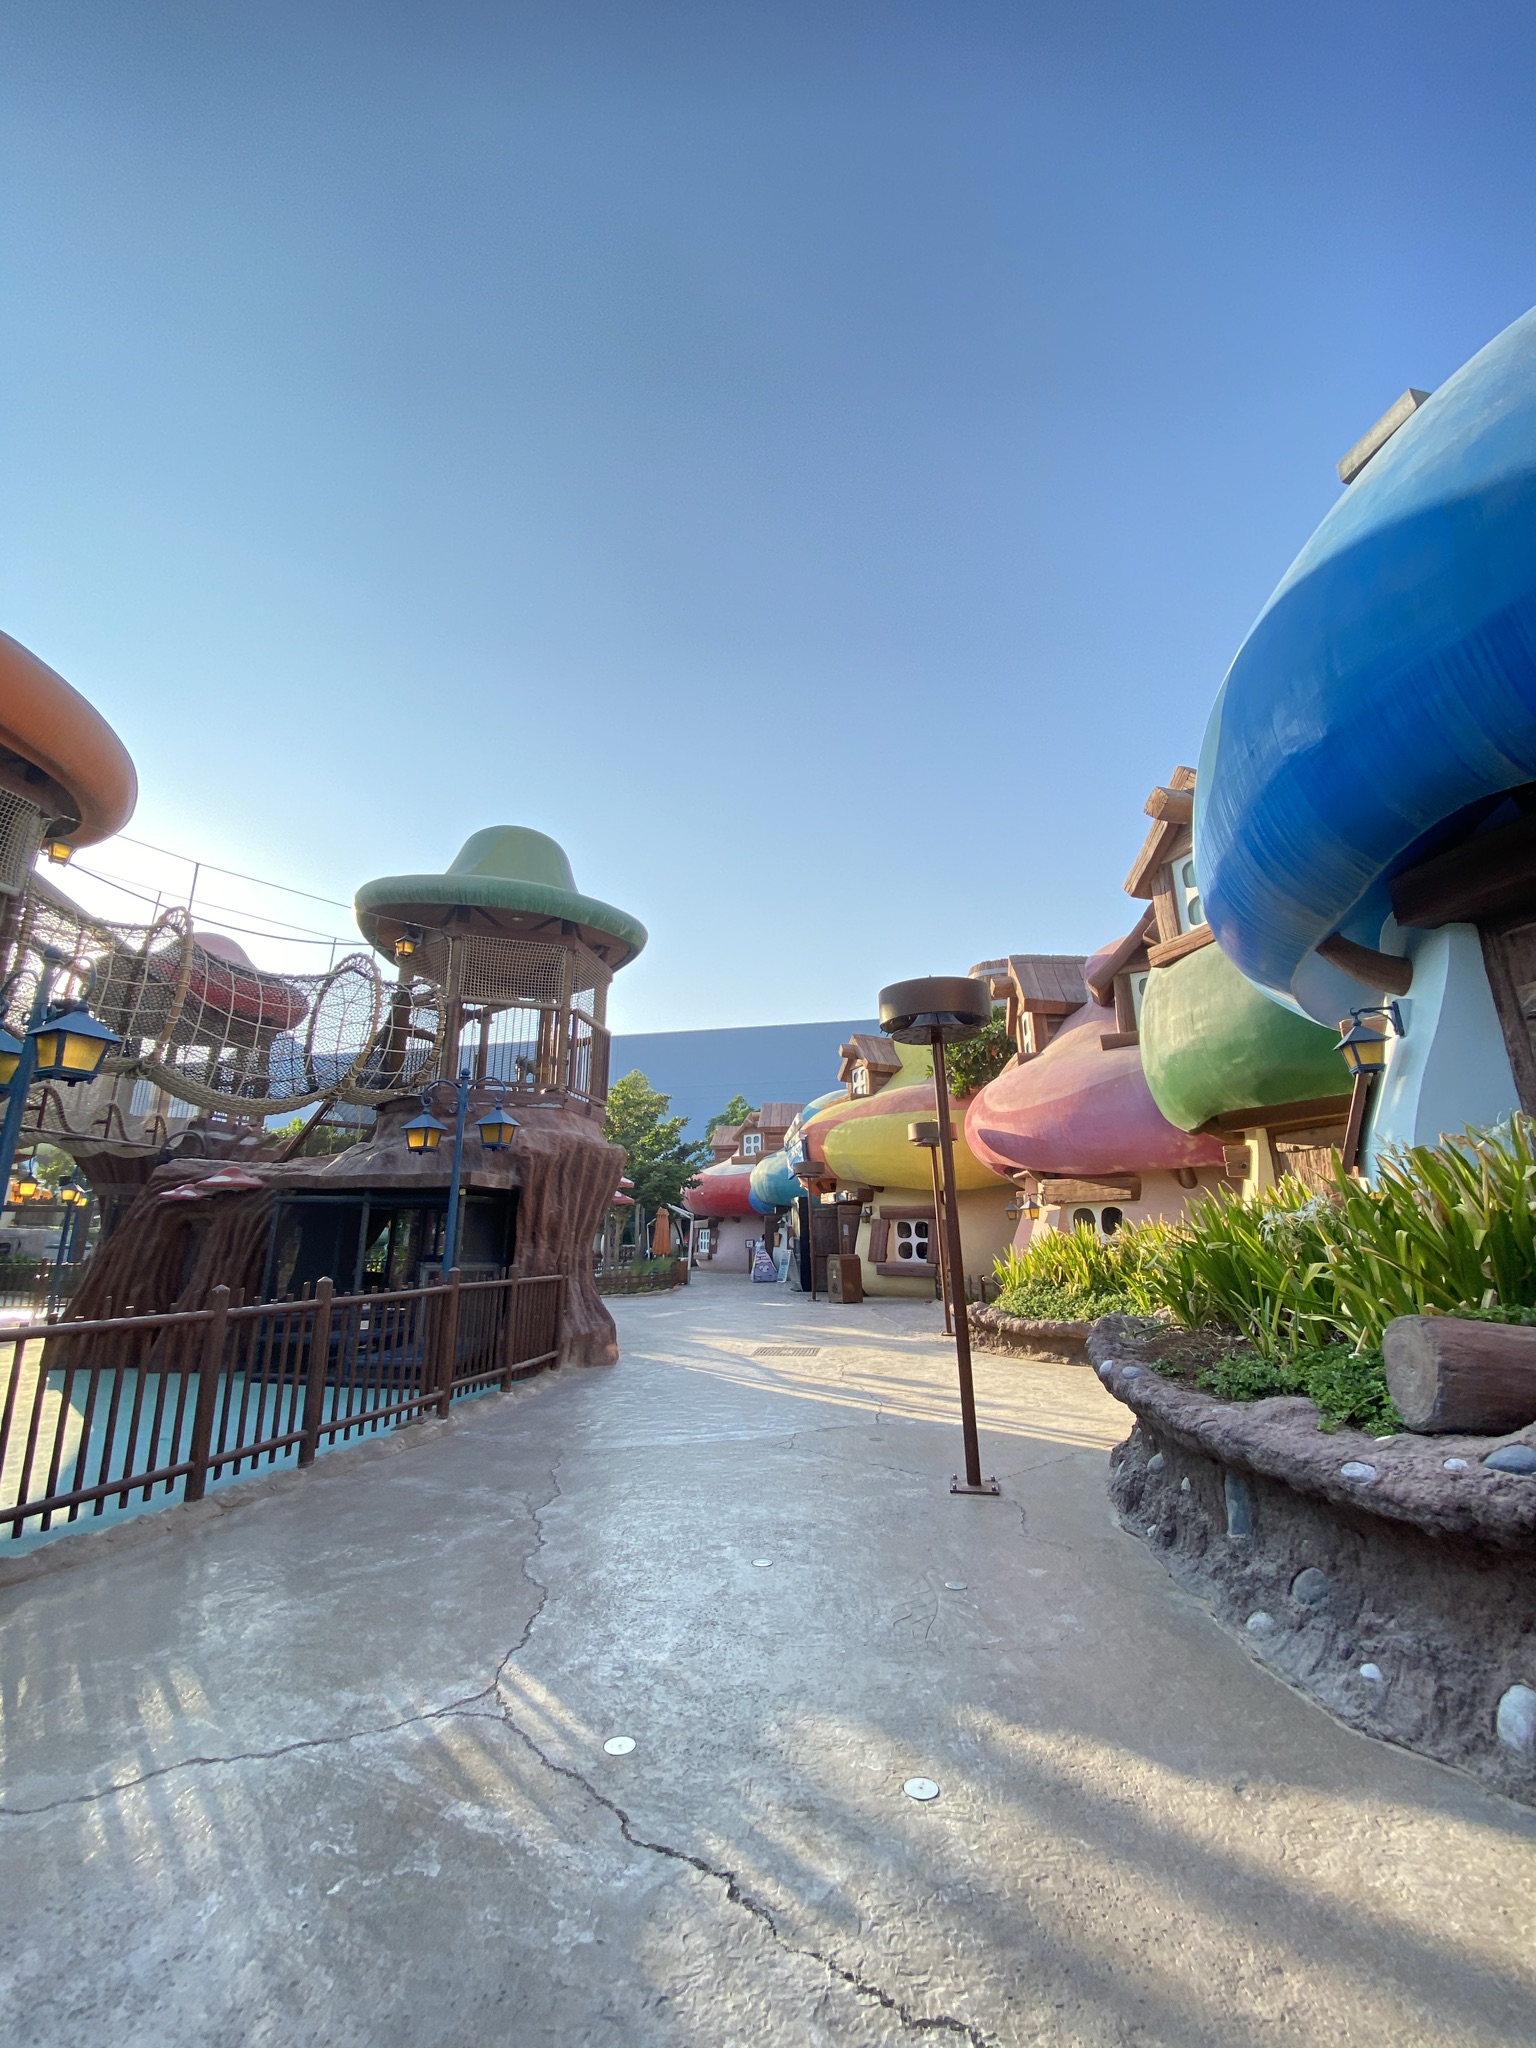 Water Park Background Images HD Pictures and Wallpaper For Free Download   Pngtree